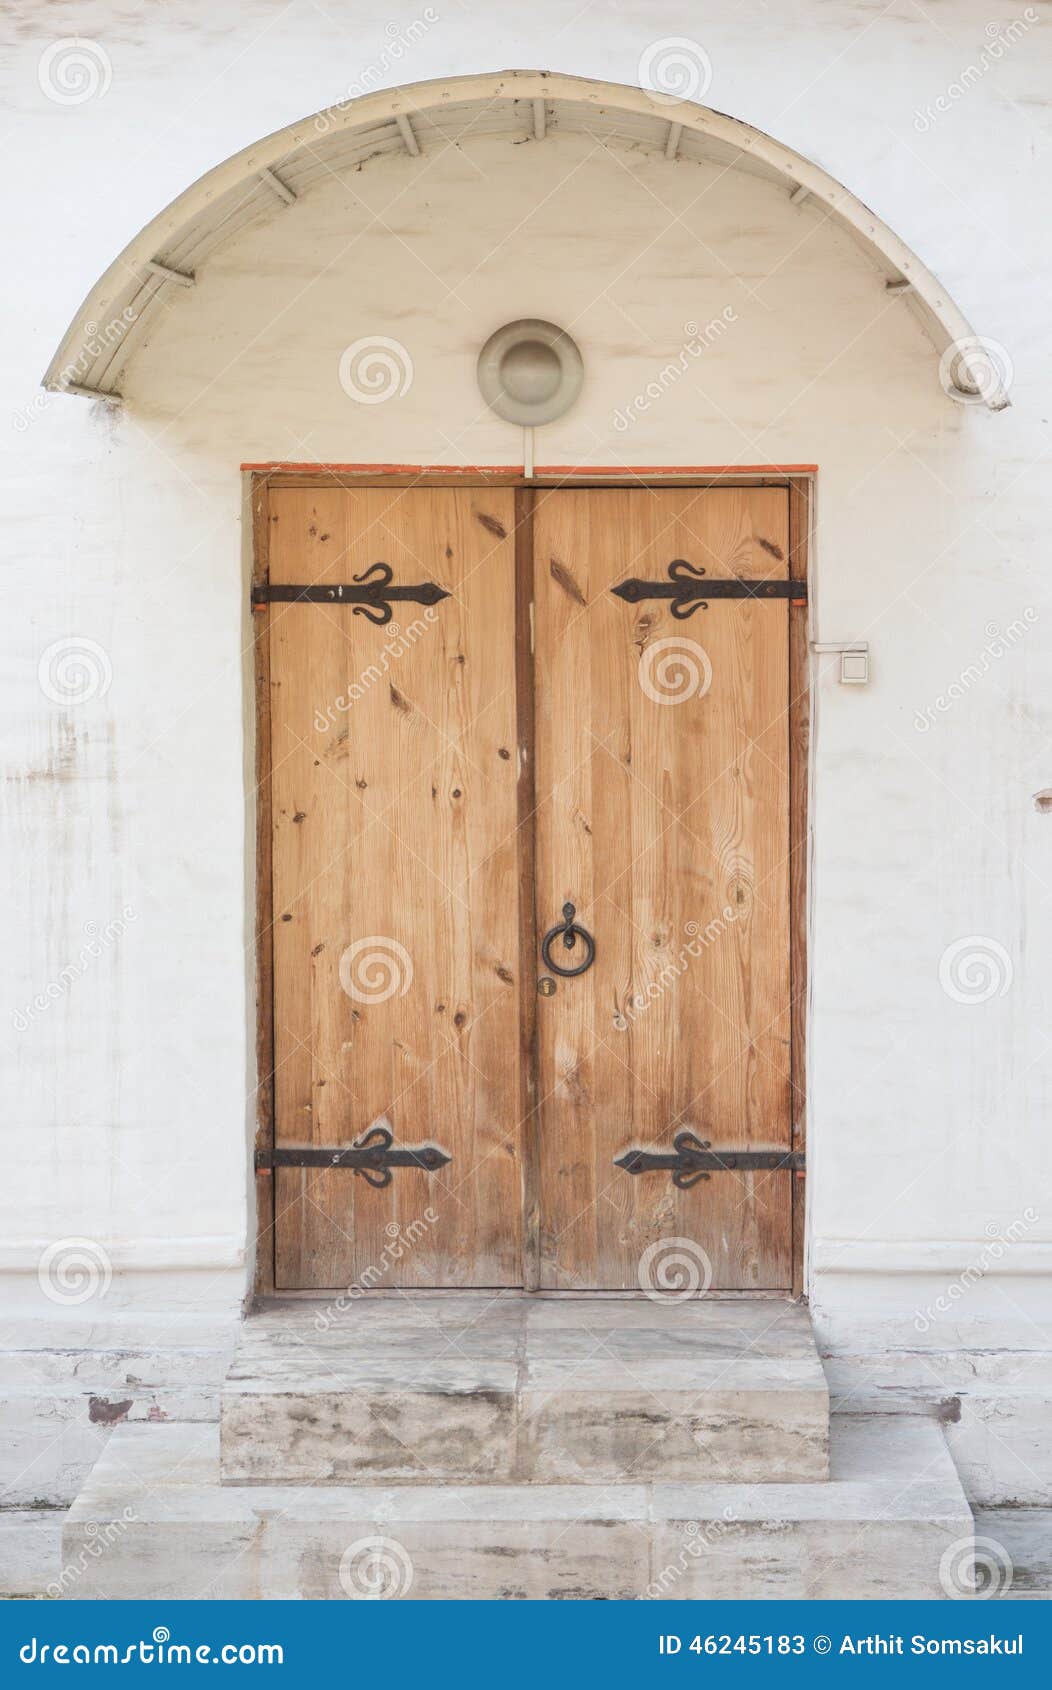 Historical Ornate Wooden Door in a Stone Entry Stock Image - Image of ...